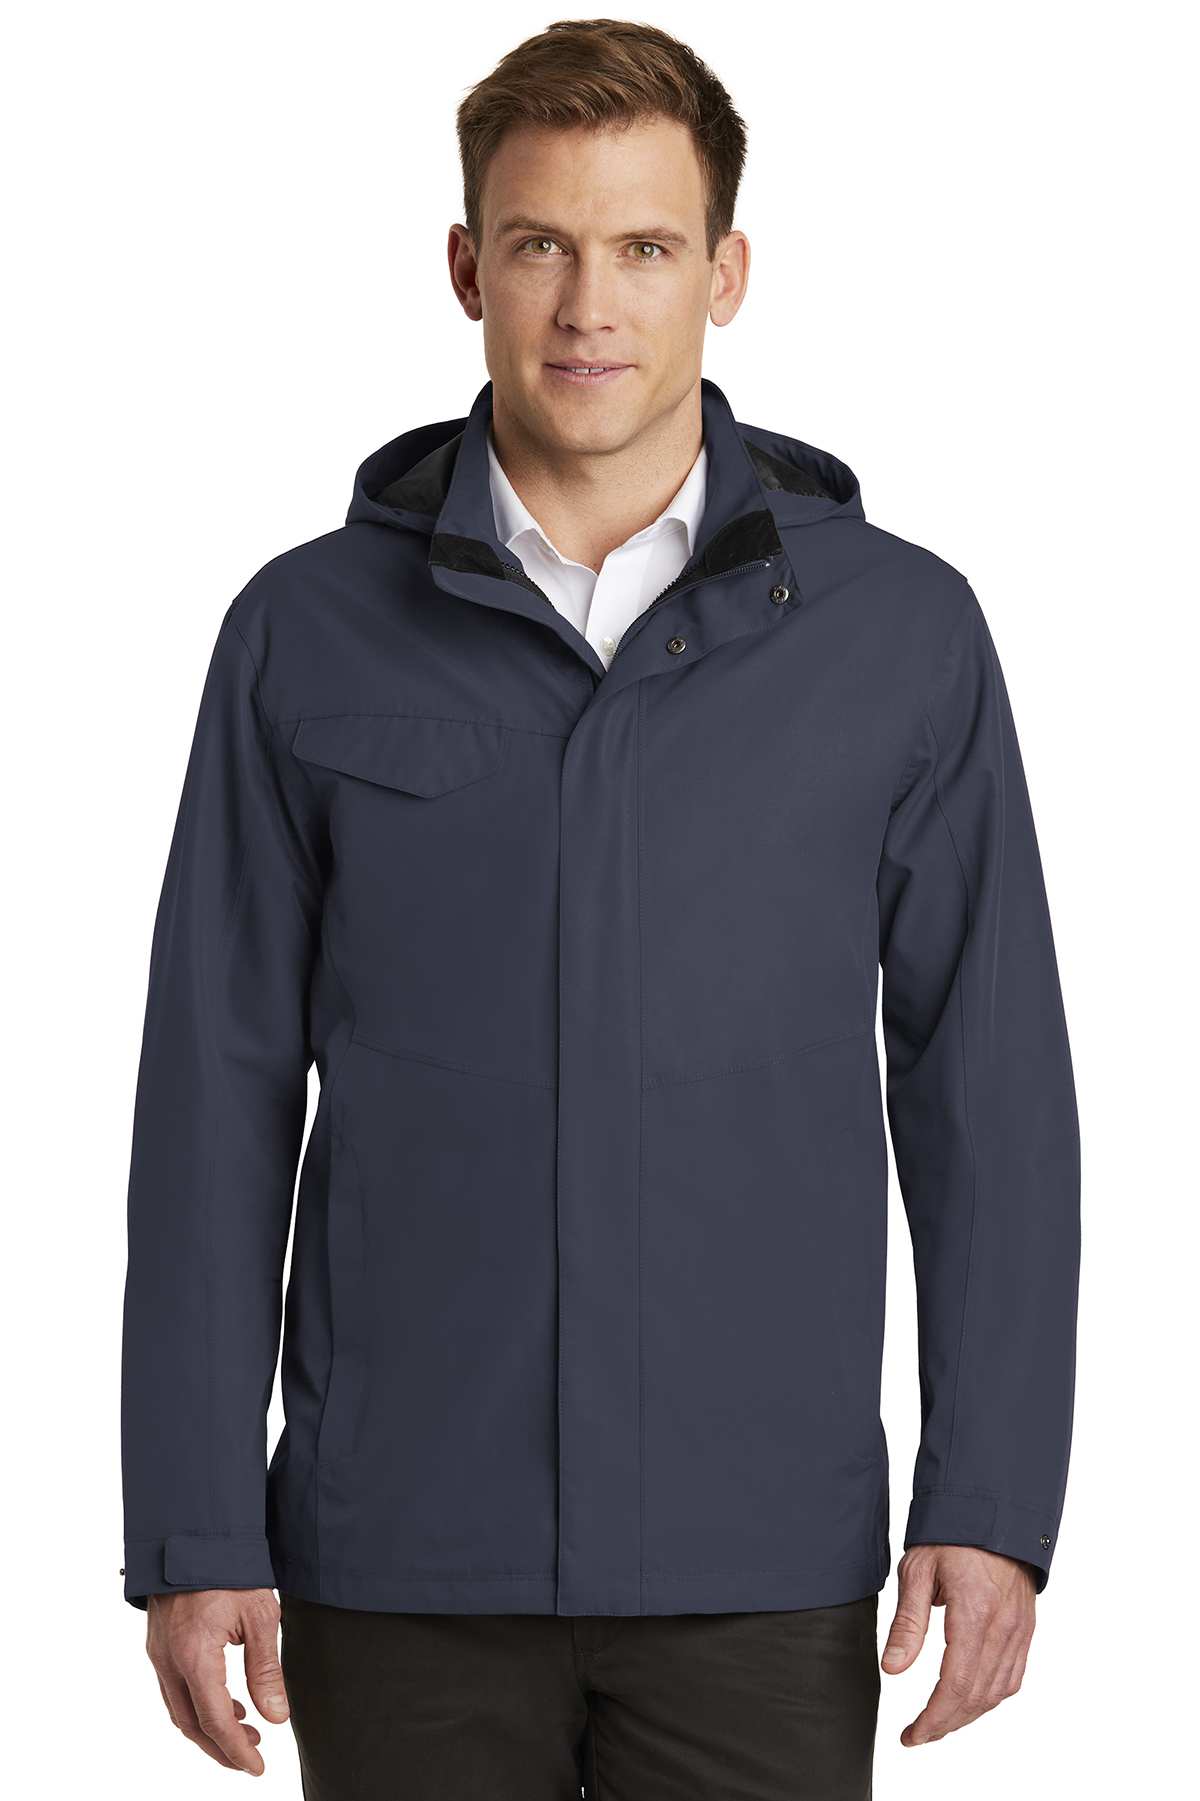 Port Authority J900 - Men's Collective Outer Shell Jacket